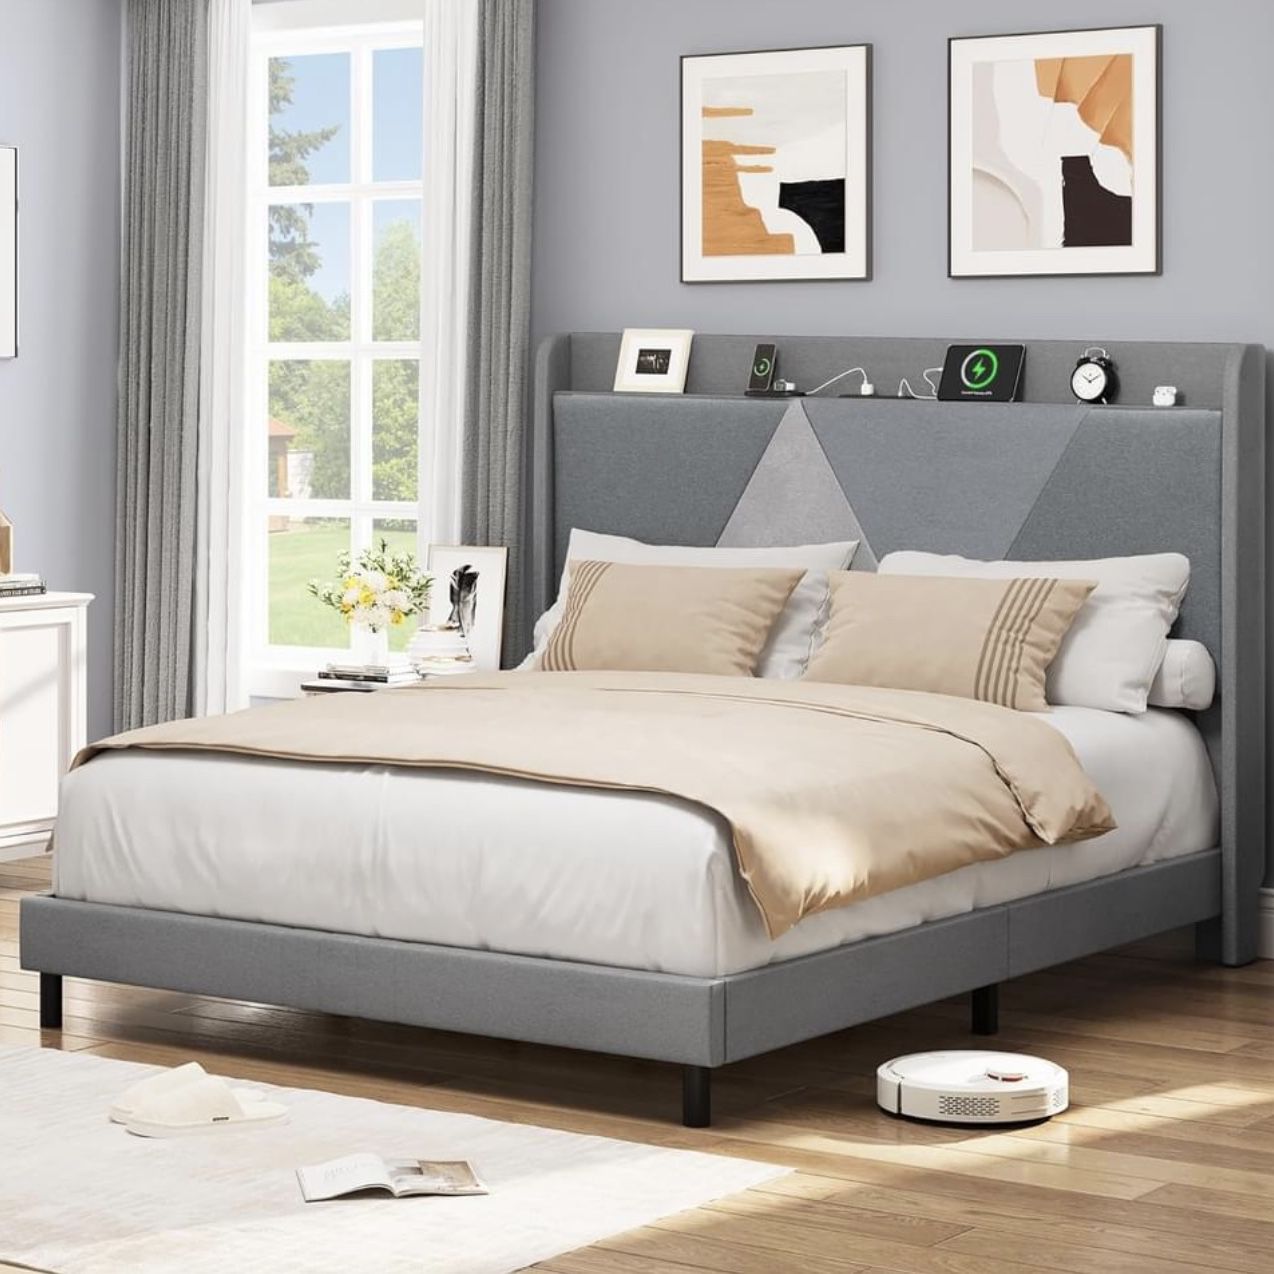 UPHOLSTERED QUEEN BED FRAME WITH TYPE-C And USB PORTS BRAND NEW IN BOX!!!